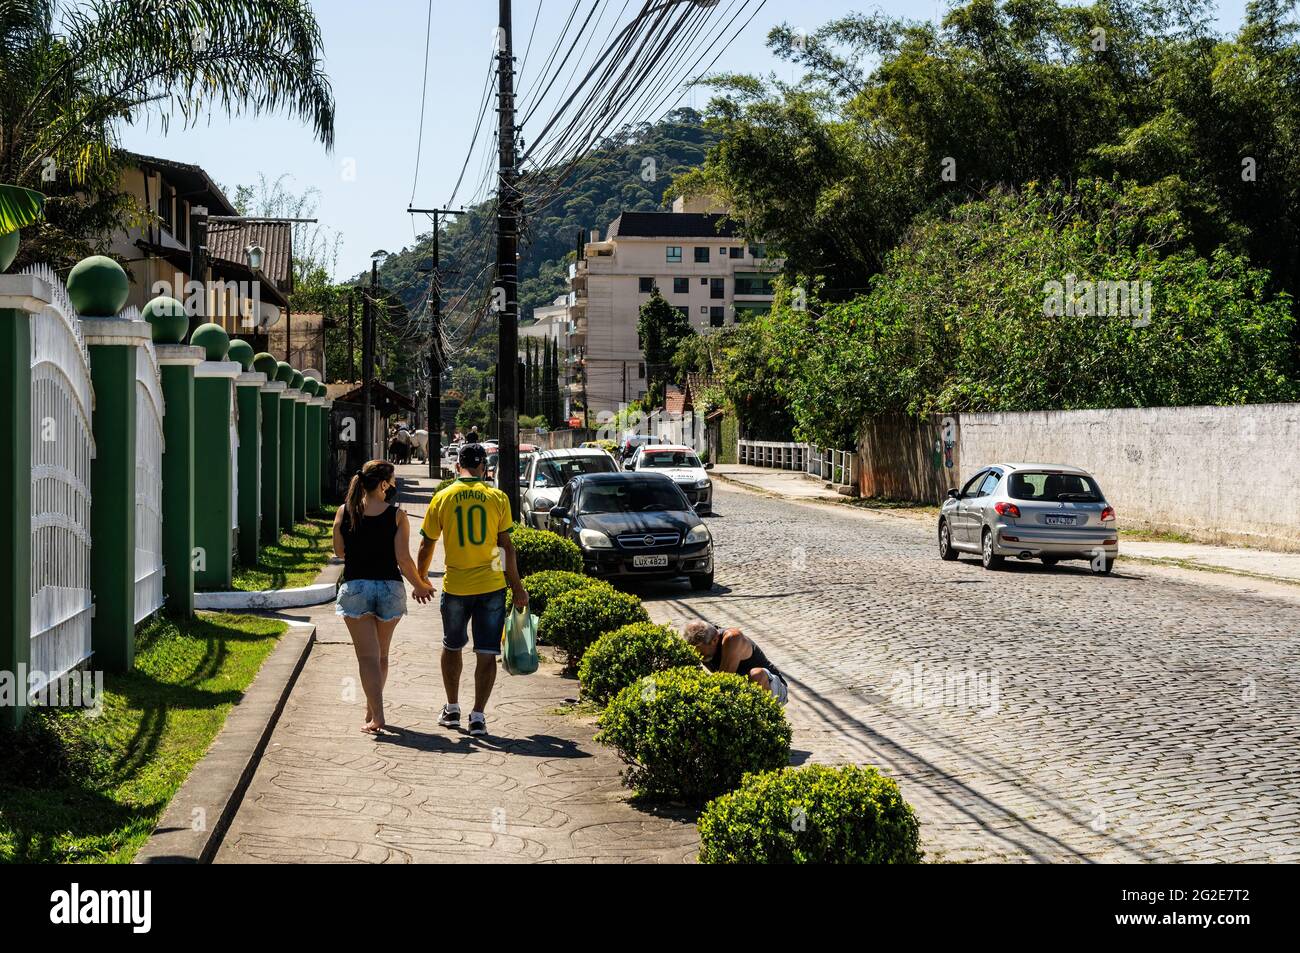 North view of Alfredo Rebelo Filho street with some local traffic passing by and a couple holding hands walking on the left sidewalk in a sunny day. Stock Photo